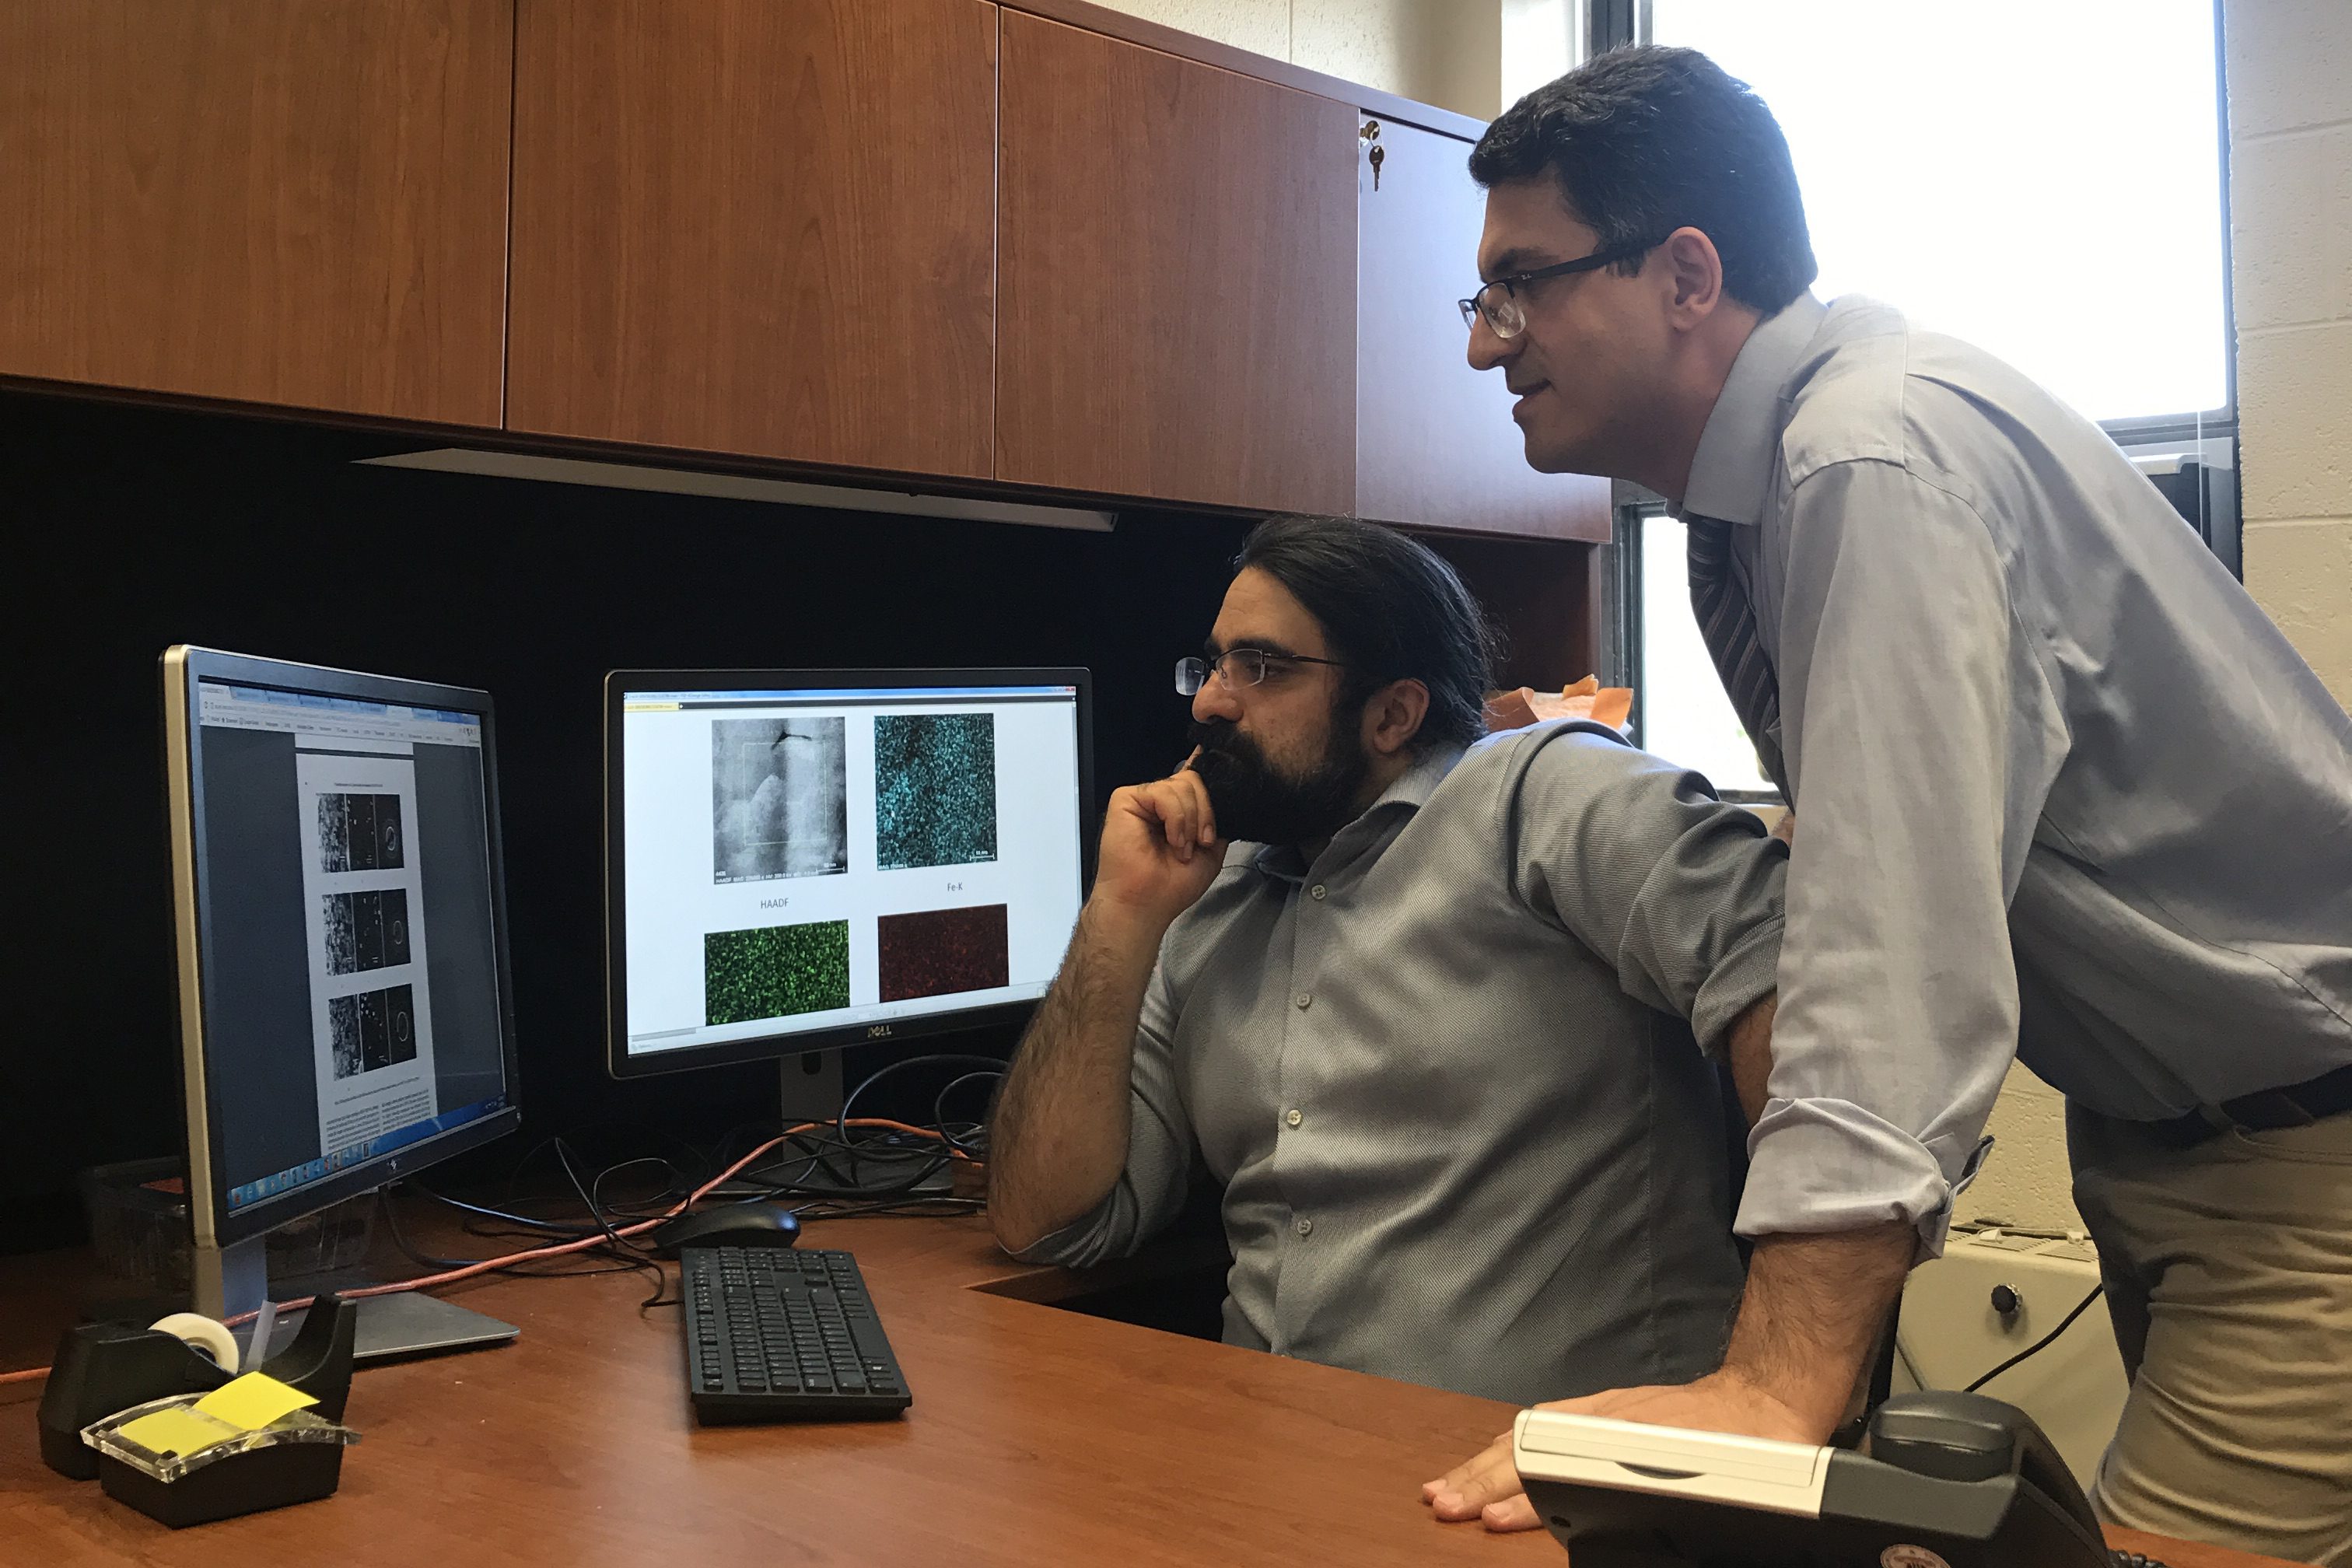 Postdoctoral researcher Peiman Shahbeigi (standing) and Sina Shahbazmohmadi, assistant professor in biomaterials engineering, discuss grain microstructures characterized by an advanced electron microscope.